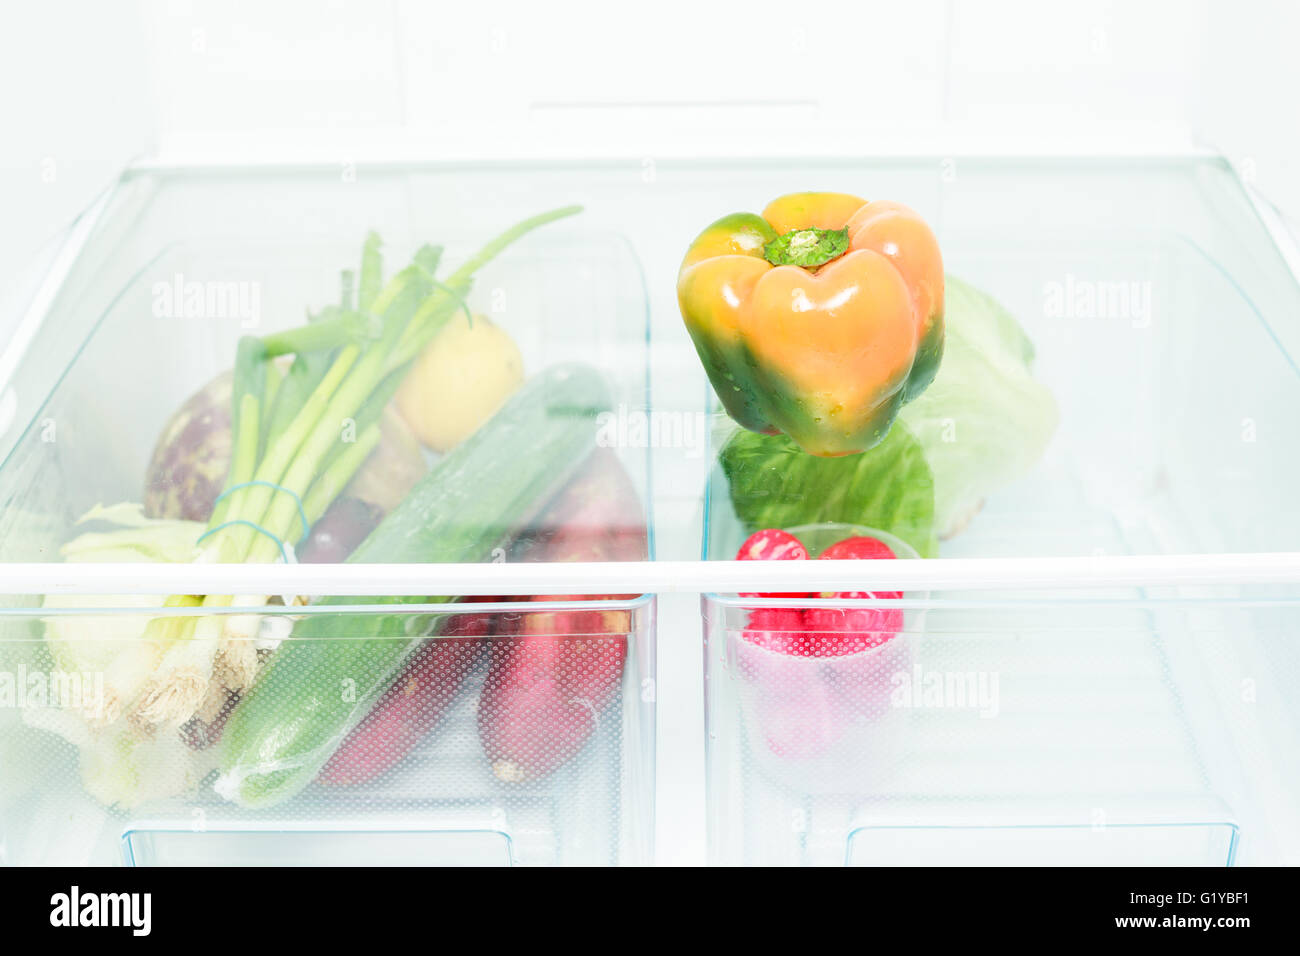 A bunch of different vegetables in a refrigerator Stock Photo